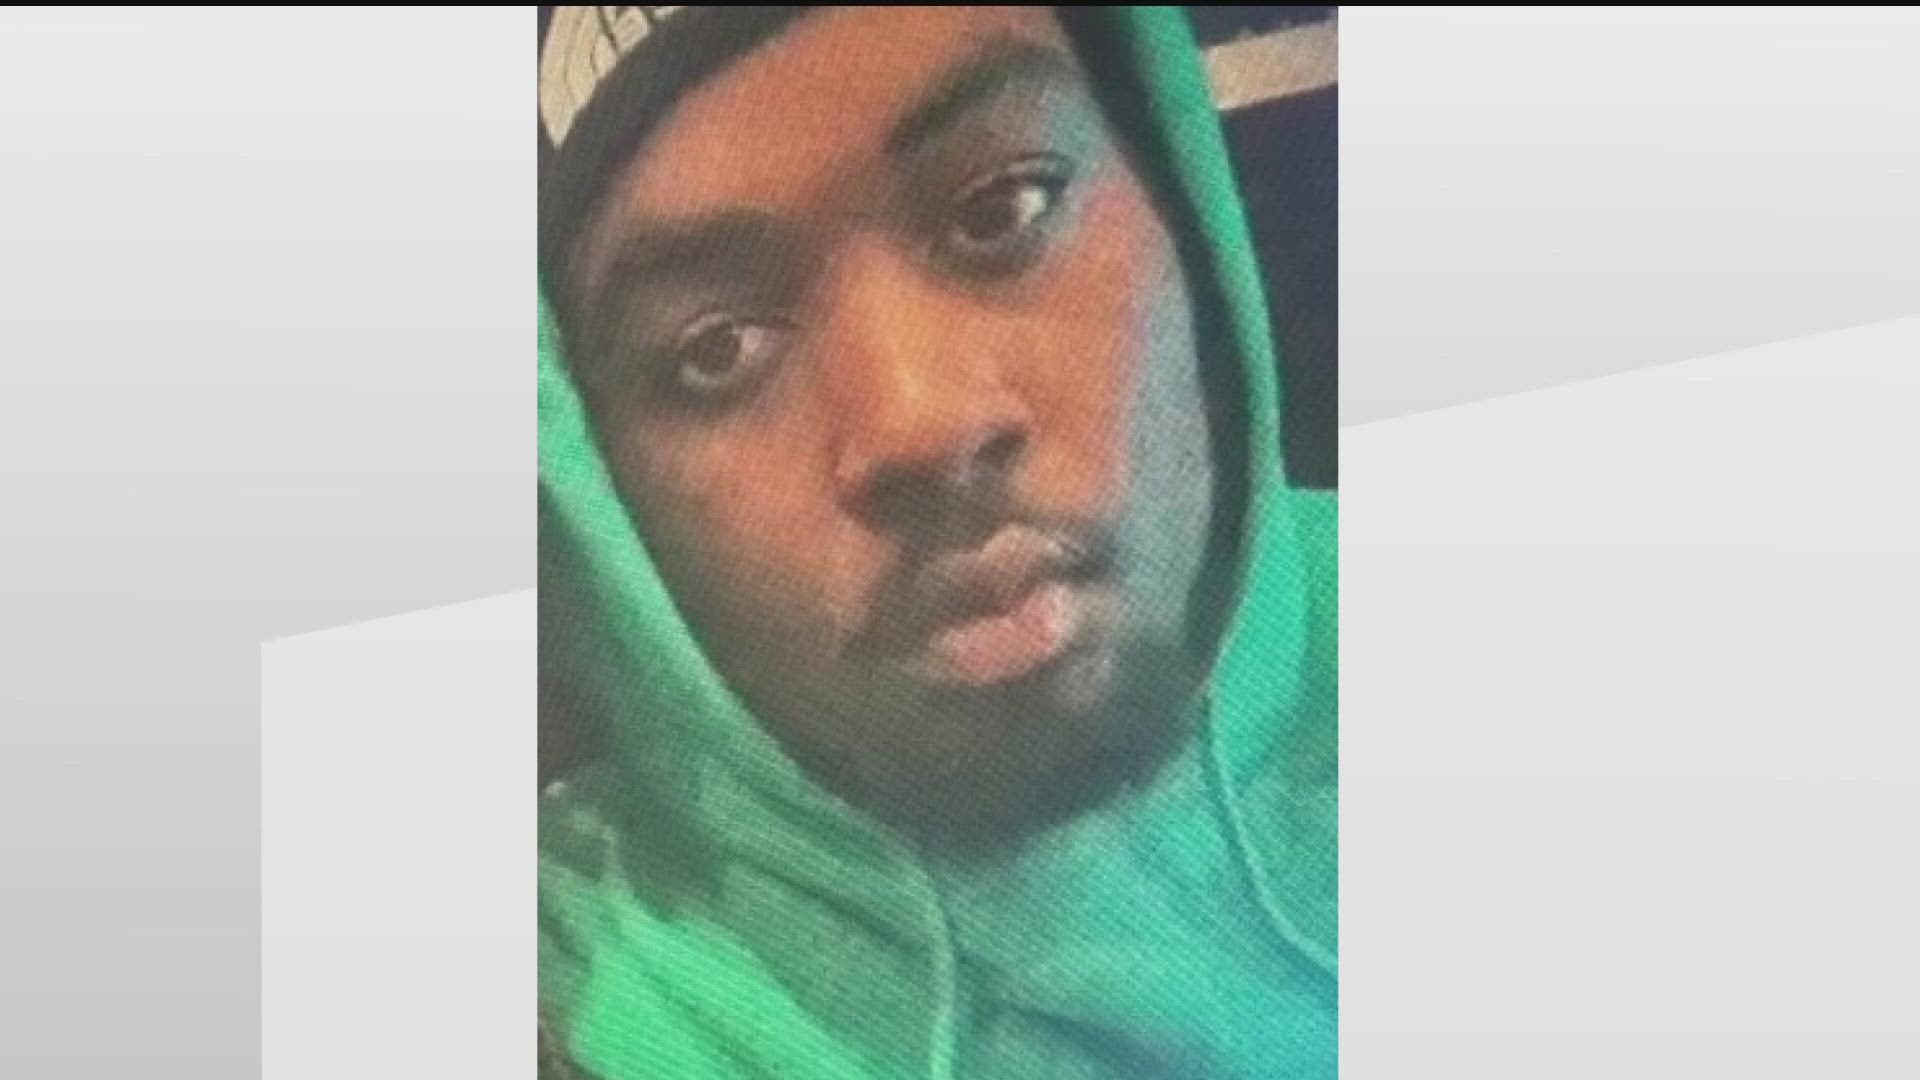 The arrest comes four days after Brendon Young allegedly shot and killed 17-year-old DeAndre Henderson near the high school campus.